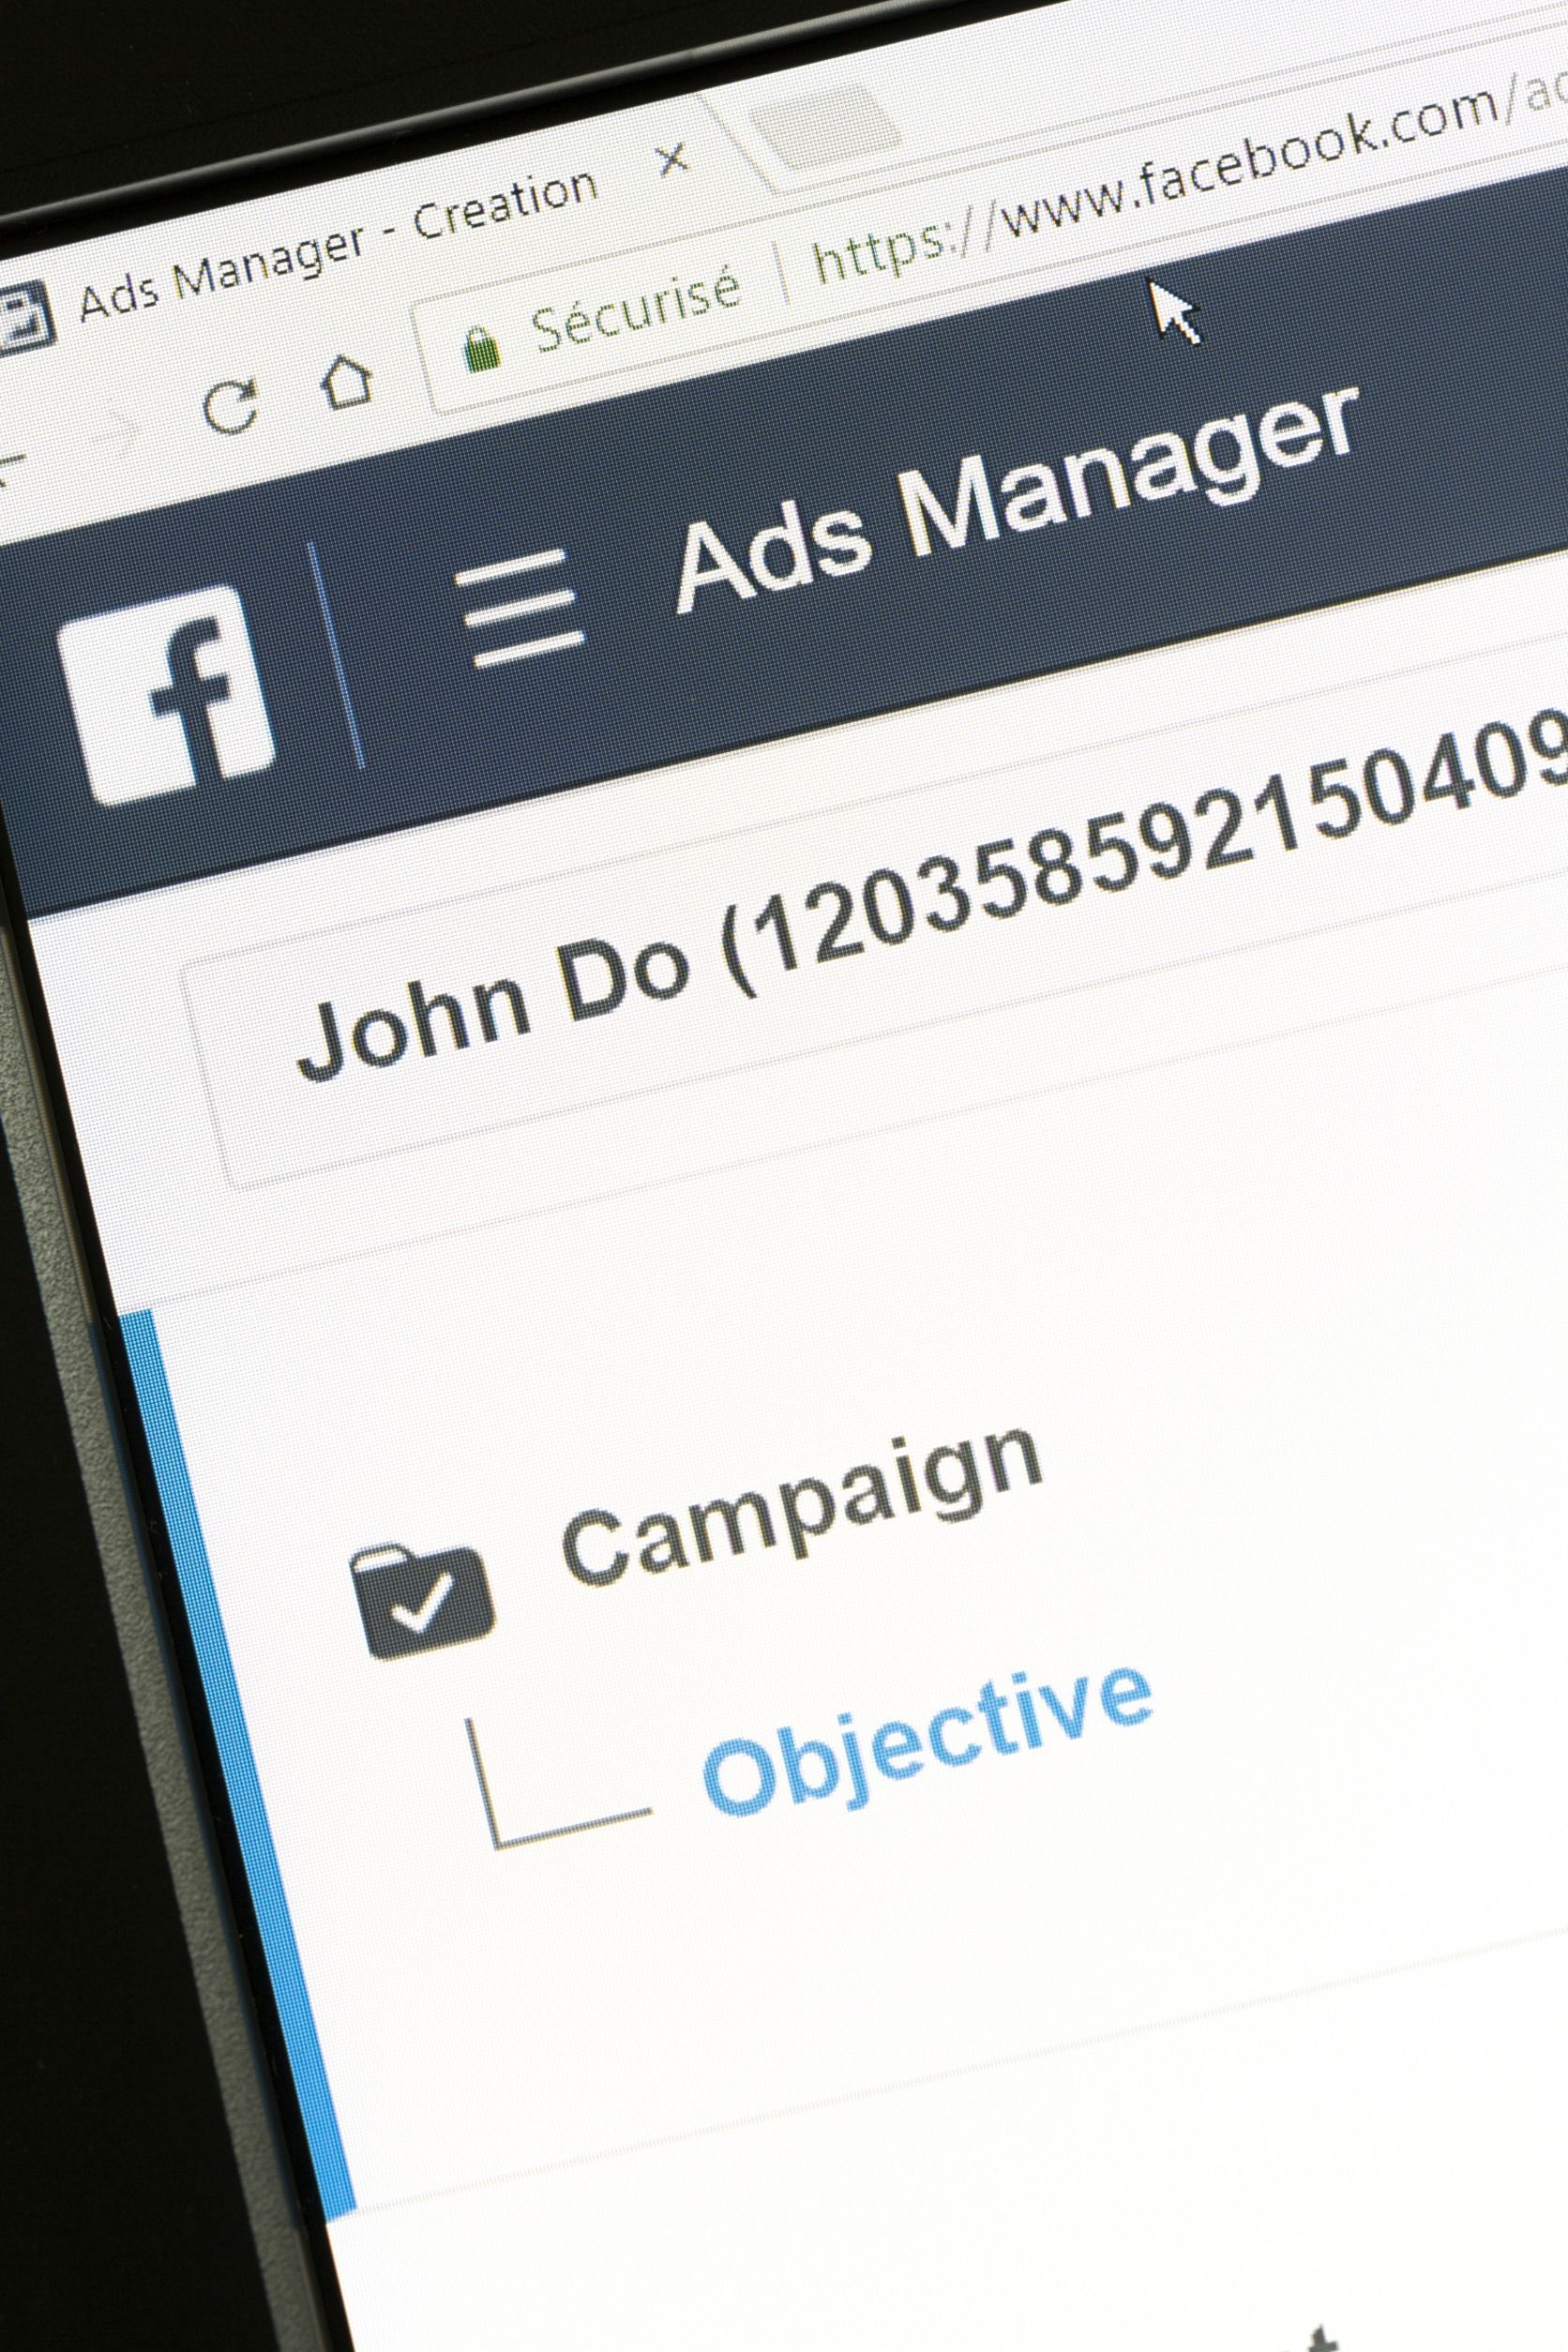 How to Advertise on Facebook in 8 Steps: The Visual Guide